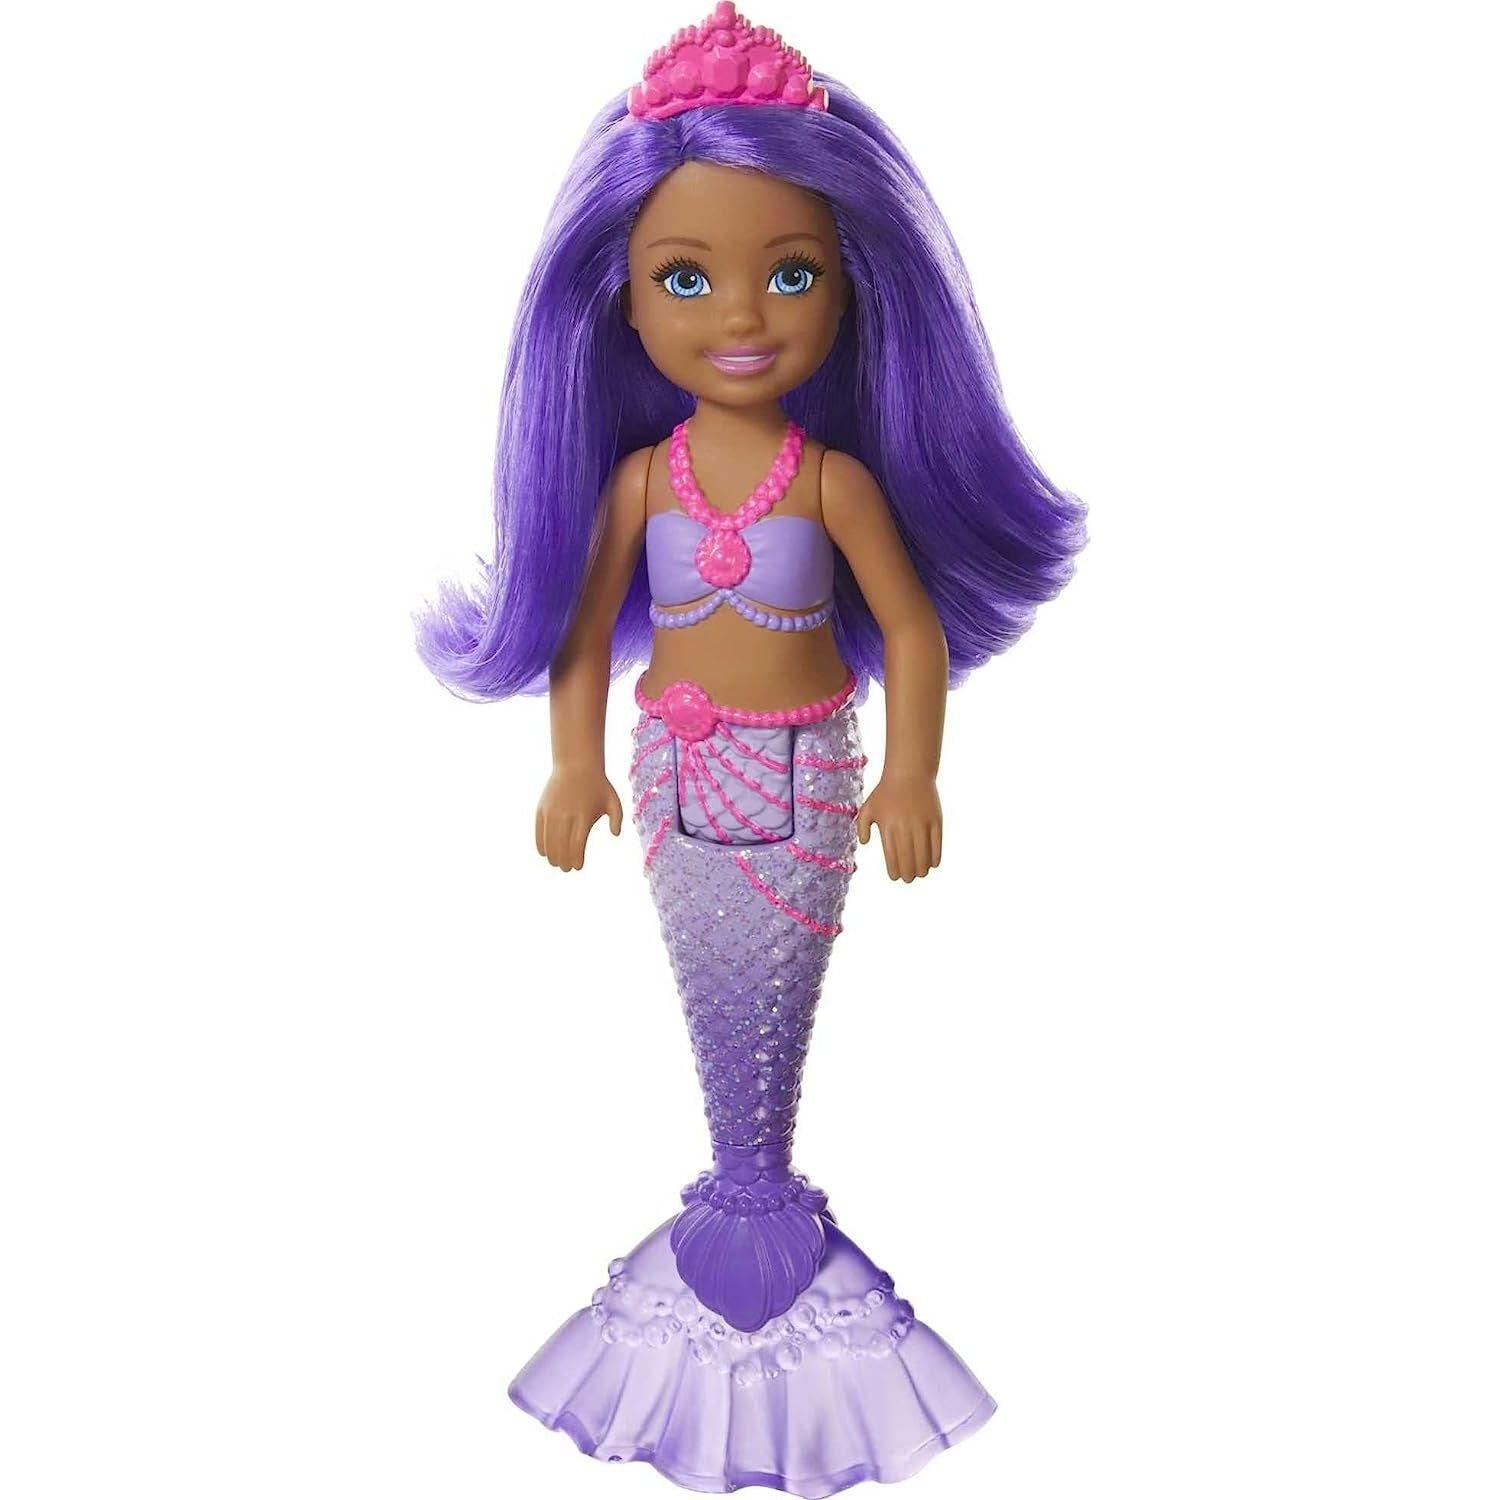 Barbie Dreamtopia Chelsea Mermaid Doll with Purple Hair & Tail, Small Doll Bends At Waist